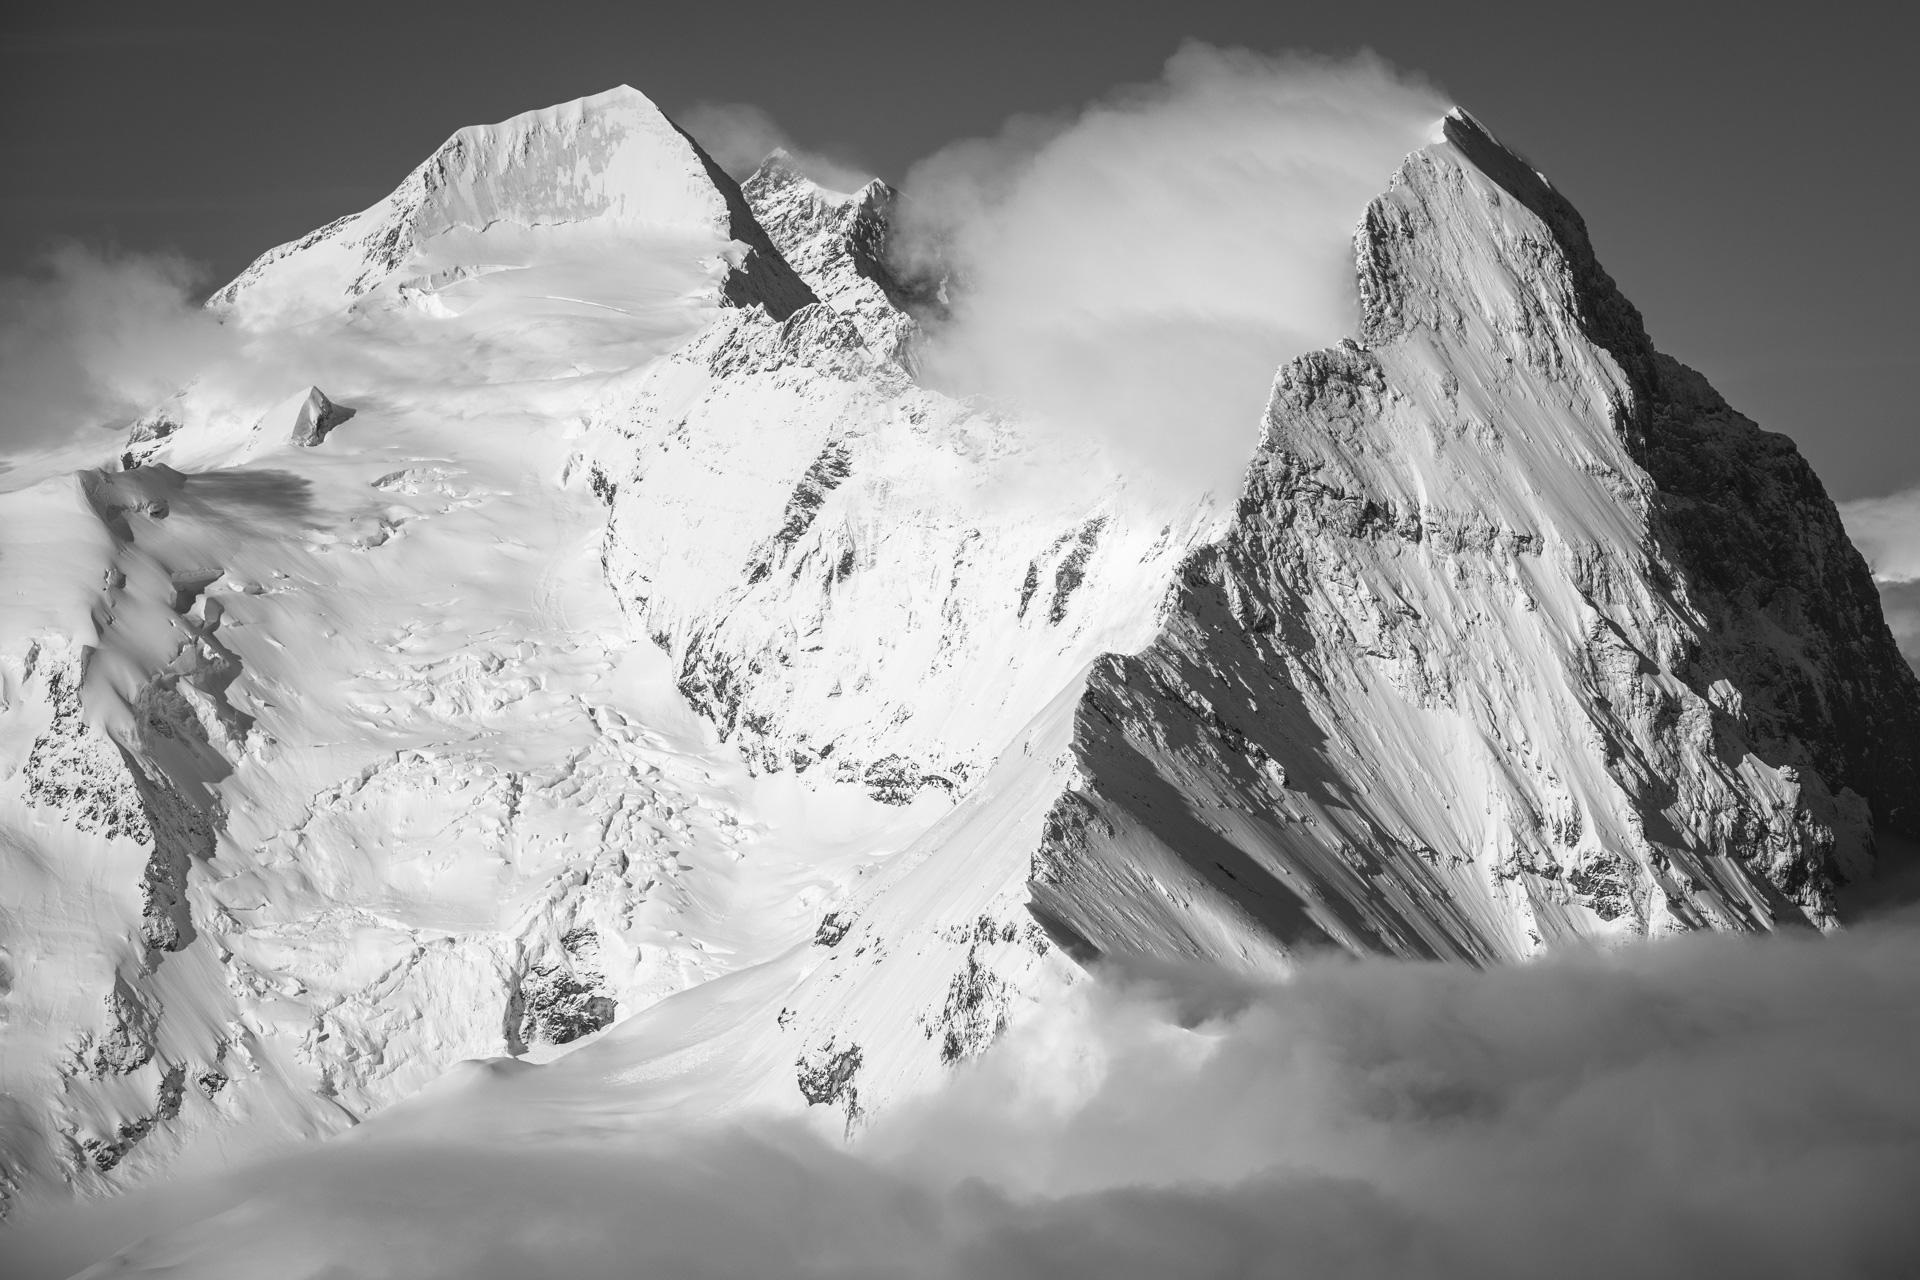 Monch - Eiger - Jungfrau - Sea of clouds at summit of a mountain in the Swiss Alps in black and white - grindelwald